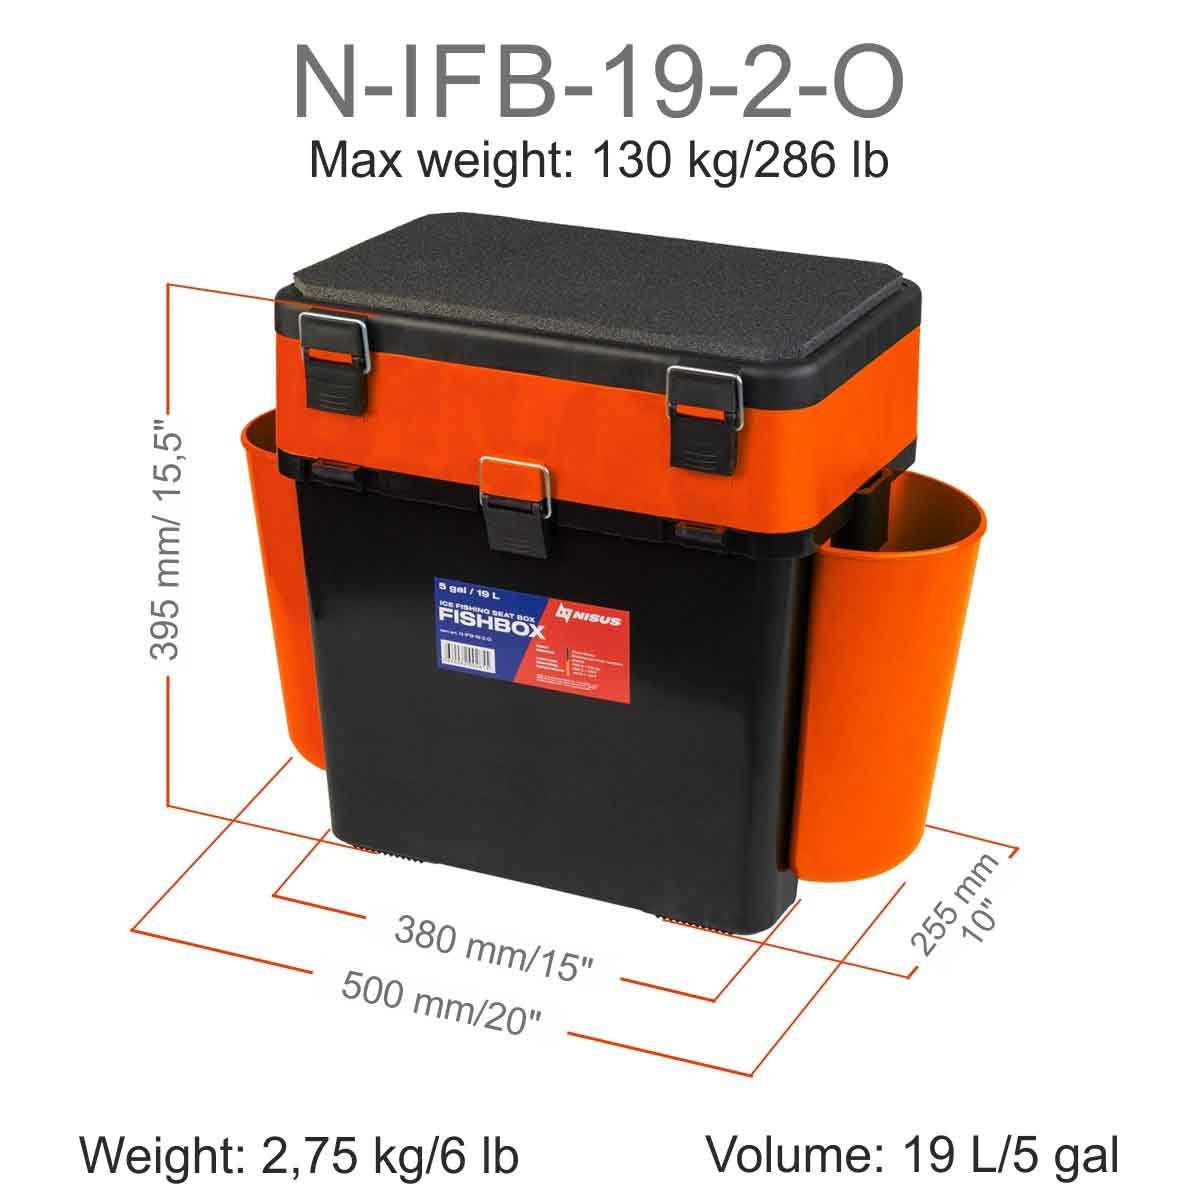 FishBox Large 5 gal Box for Ice Fishing with Seat and could carry up to 286 pounds, it is 15.5 inches high, 16 inches long and 10 inches wide, weighing 6 lbs